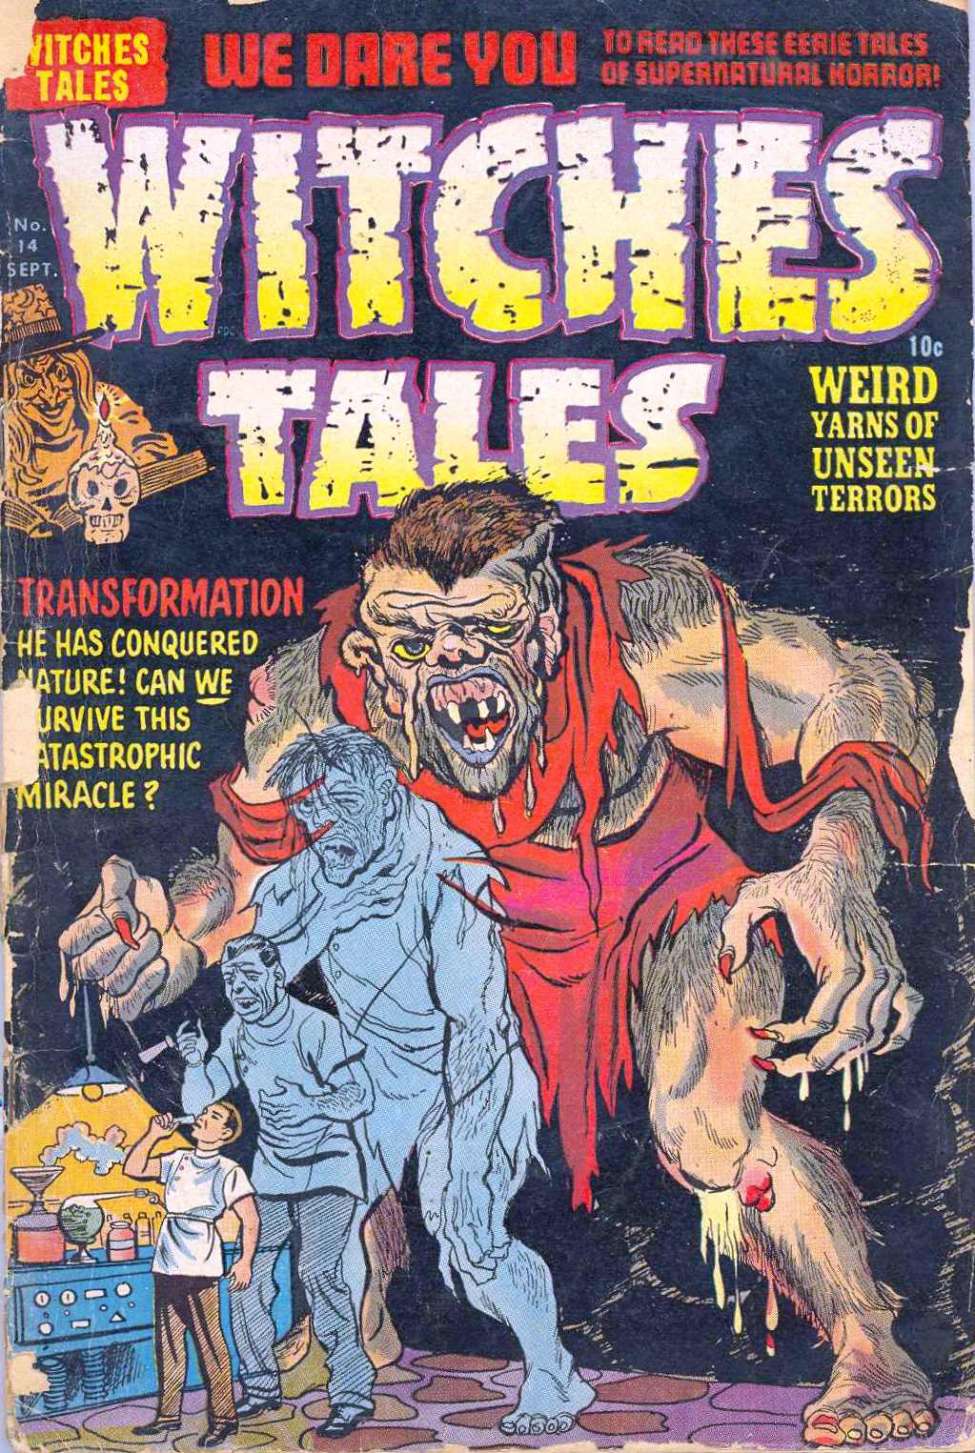 Book Cover For Witches Tales 14